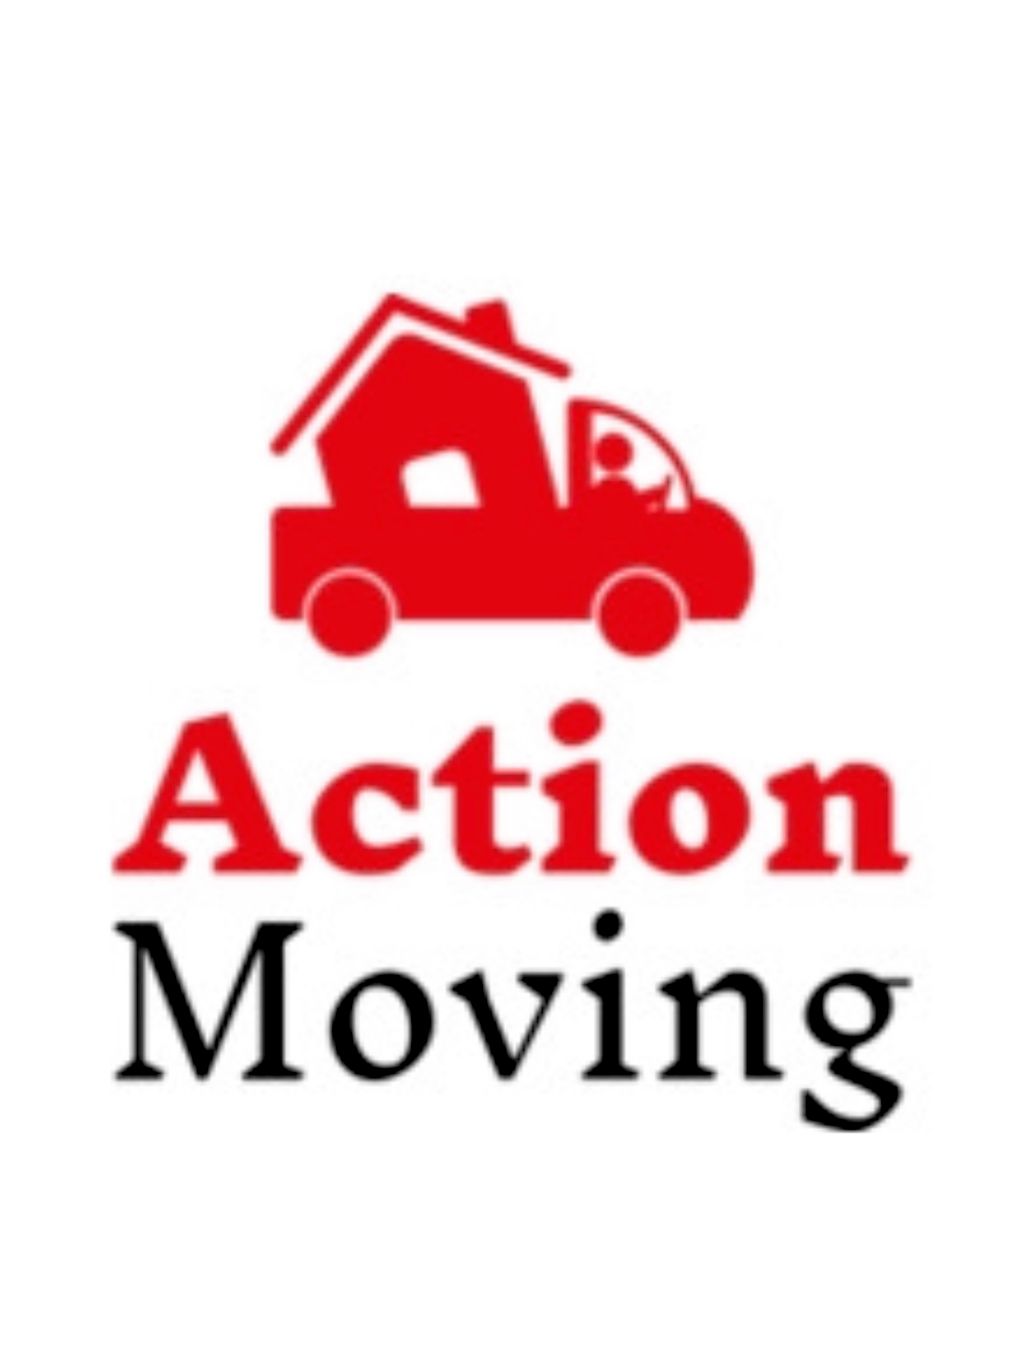 Action Moving